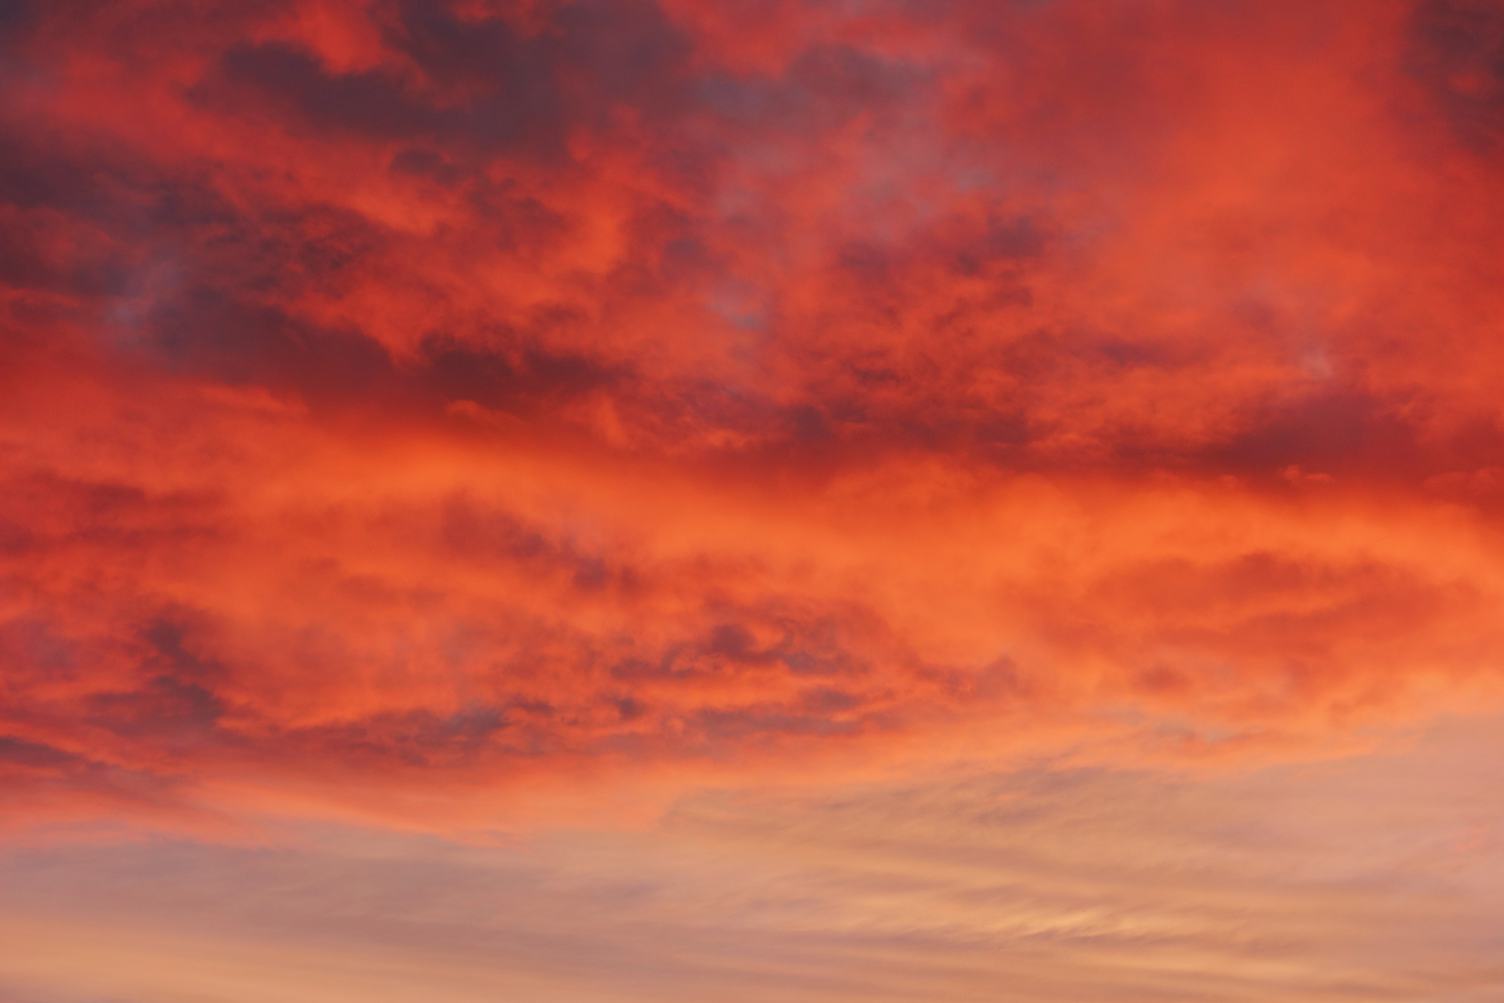 Red Sky with Clouds at Sunset